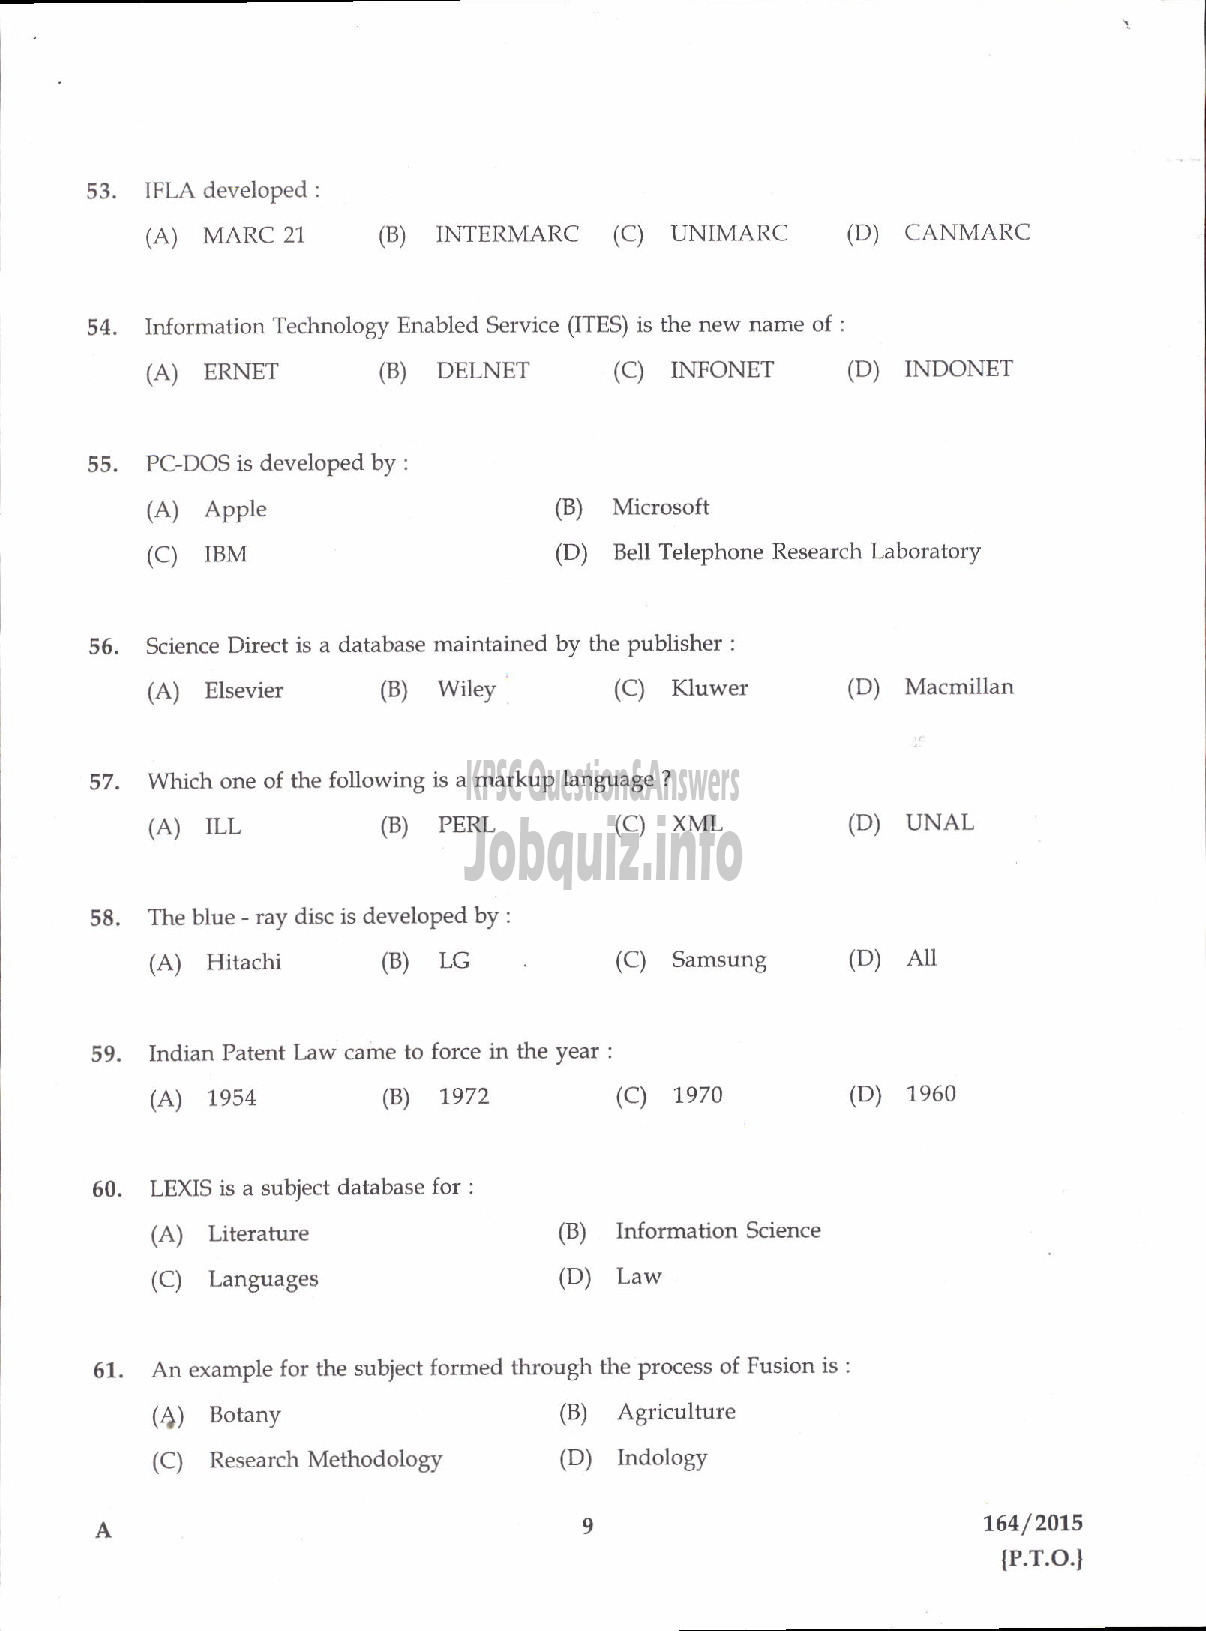 Kerala PSC Question Paper - LIBRARIAN GR III STATE CENTRAL LIBRARY-7